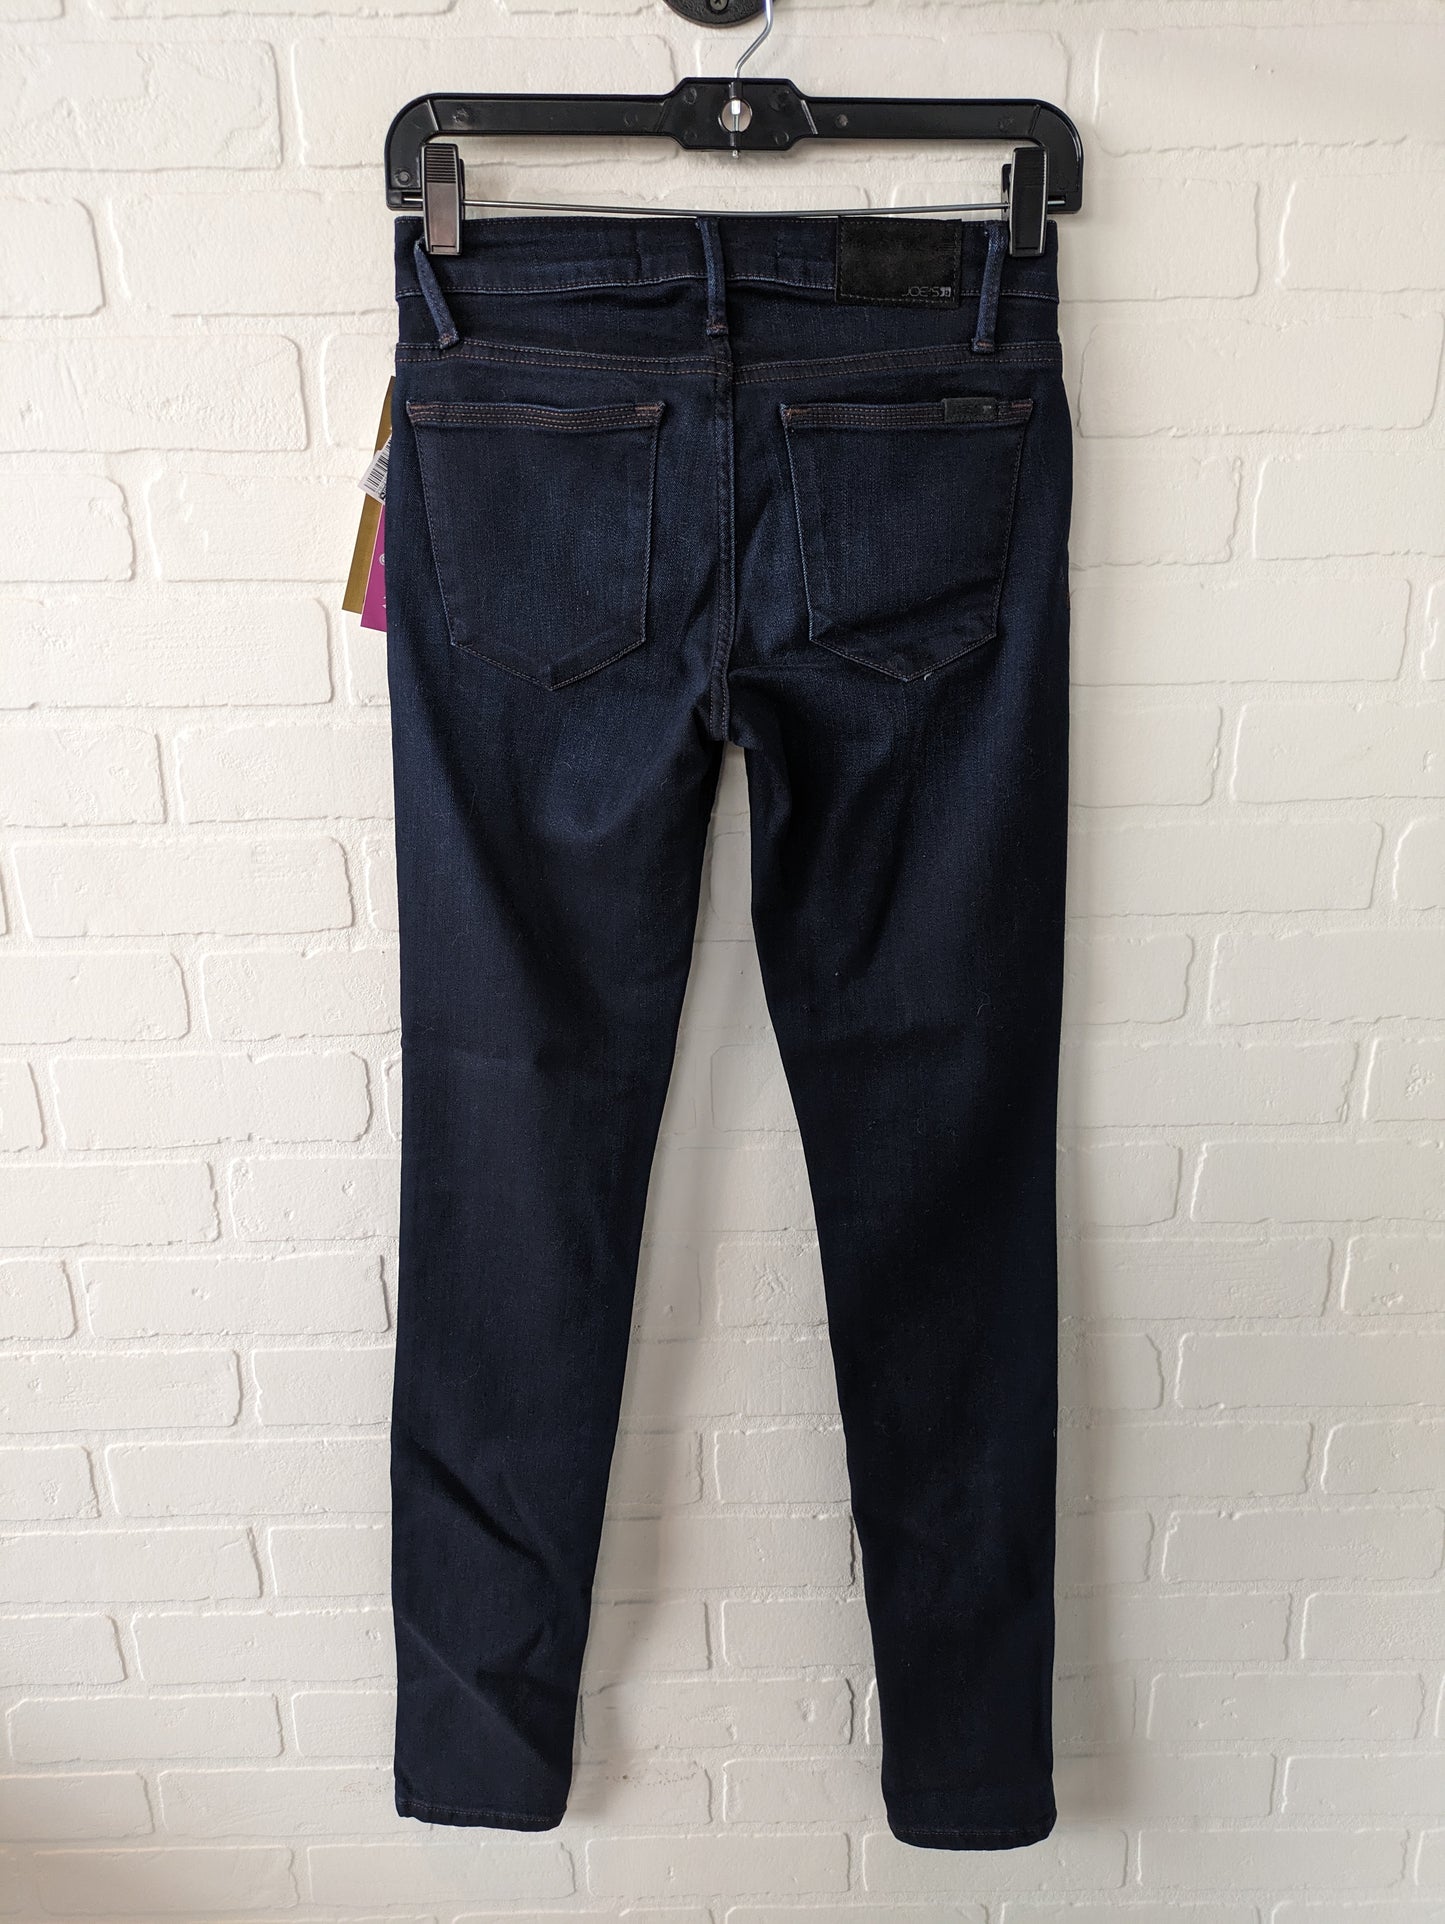 Jeans Skinny By Joes Jeans  Size: 2